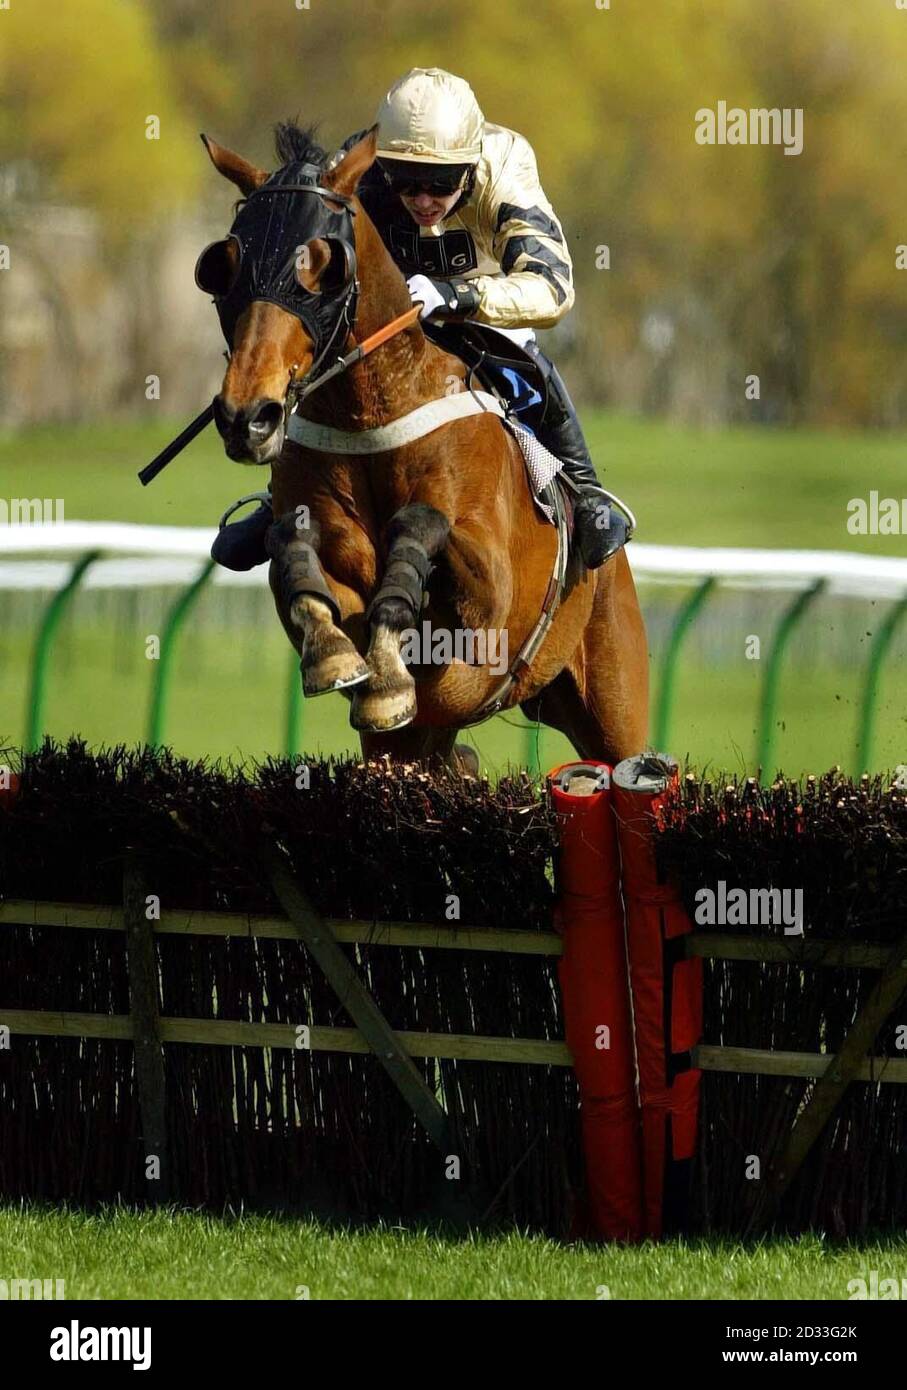 Chivalry ridden by Graham Lee, goes on to win the 2.20 James Barr Novices Hurdle (Class C) at Ayr racecourse during the Scottish Grand National Festival.  Held at Ayr since 1966 (after the closure of Bogside), the four mile, one furlong National Hunt race was won in 2003 by Ryalux, with jocky Richard McGrath, pipping Tony McCoy on Stormez at the post. Stock Photo